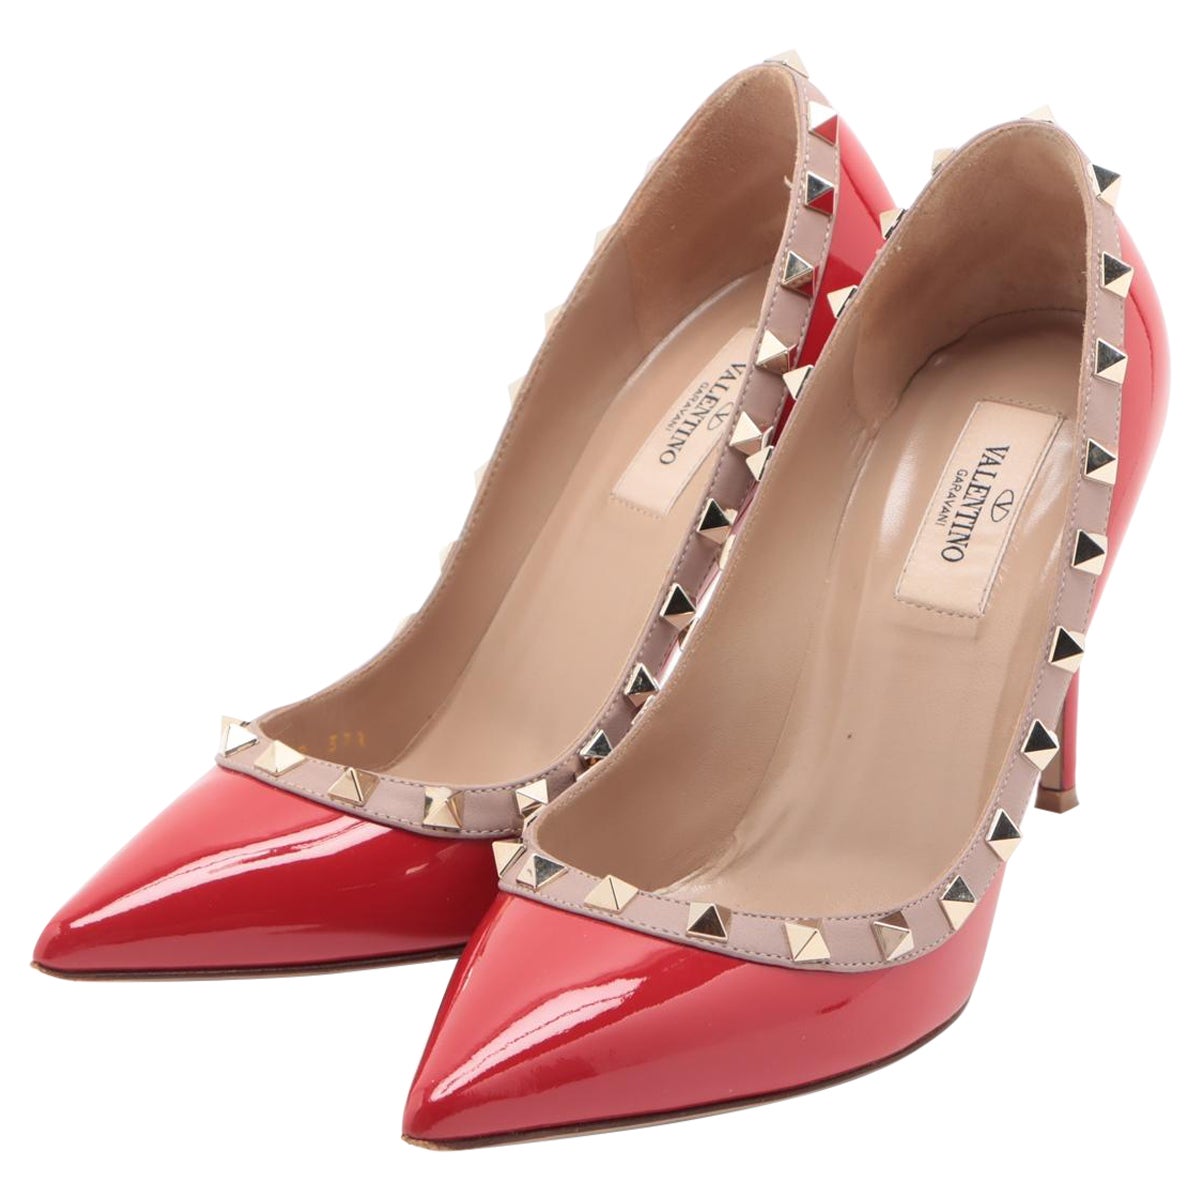 Valentino Garavani Rockstud Pointed-toe Patent Leather Pump Red For Sale